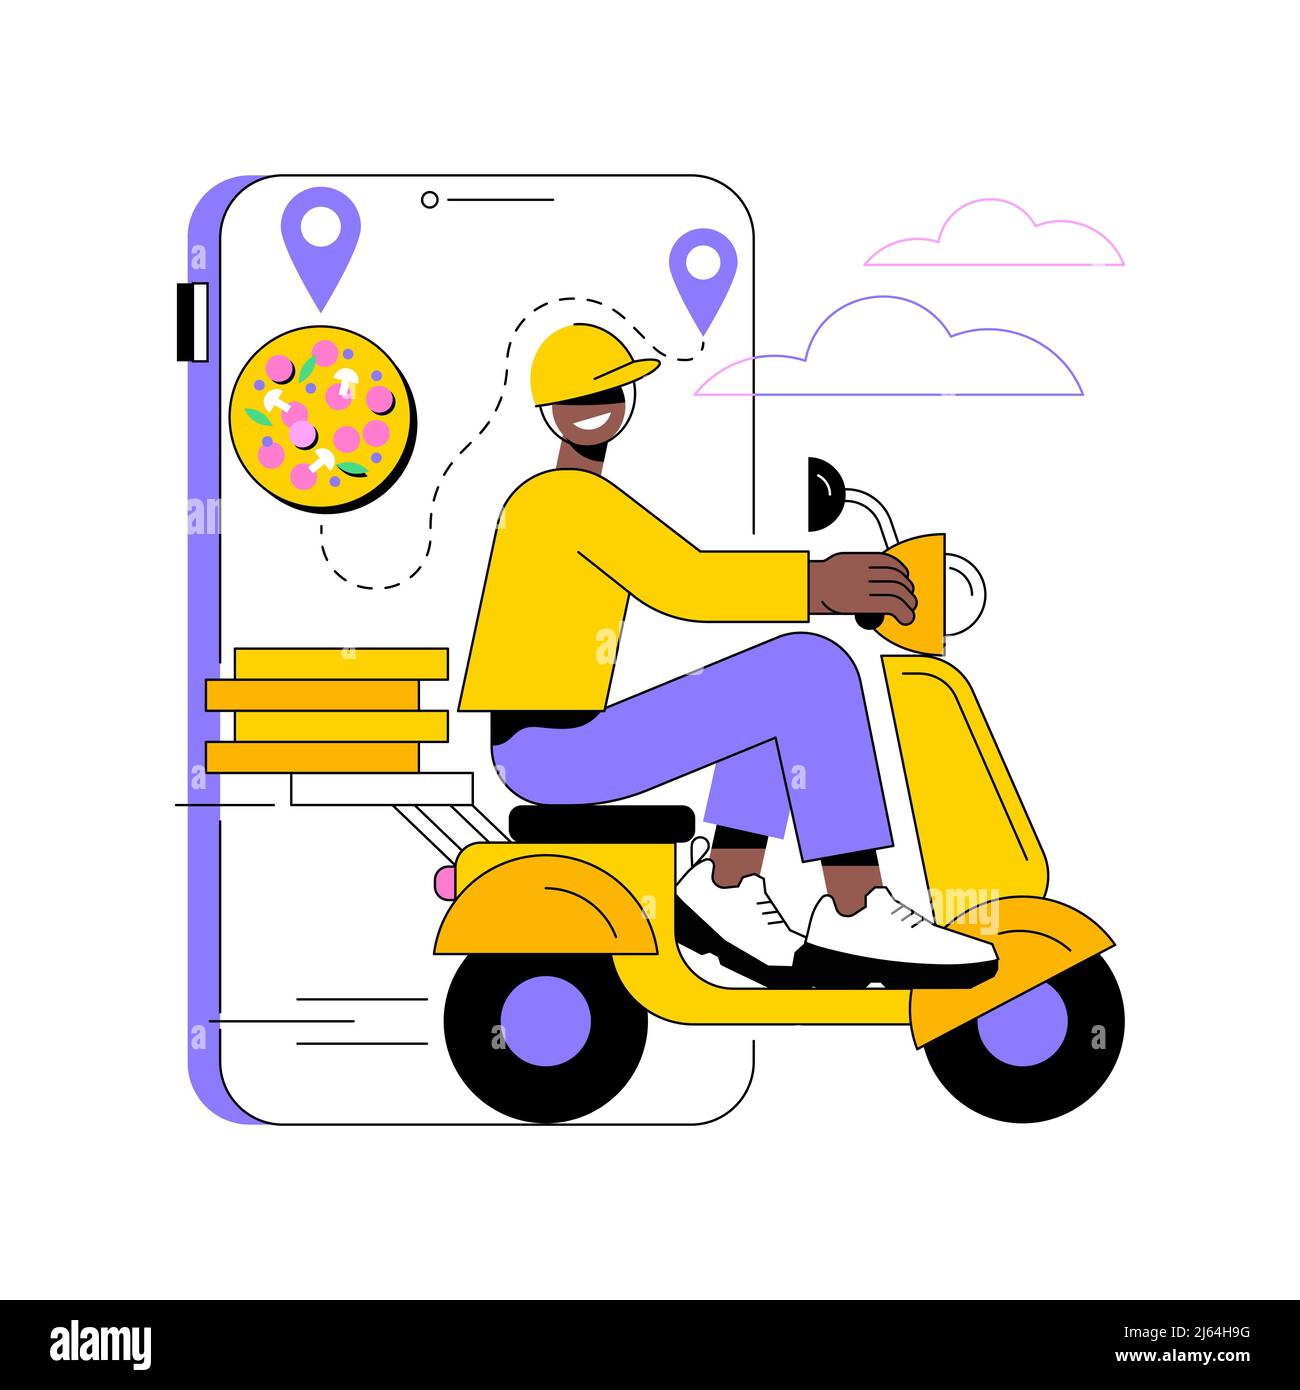 Food delivery service abstract concept vector illustration. Online food order, 24 for 7 service, pizza and sushi online menu, payment options, no-contact delivery, download app abstract metaphor. Stock Vector